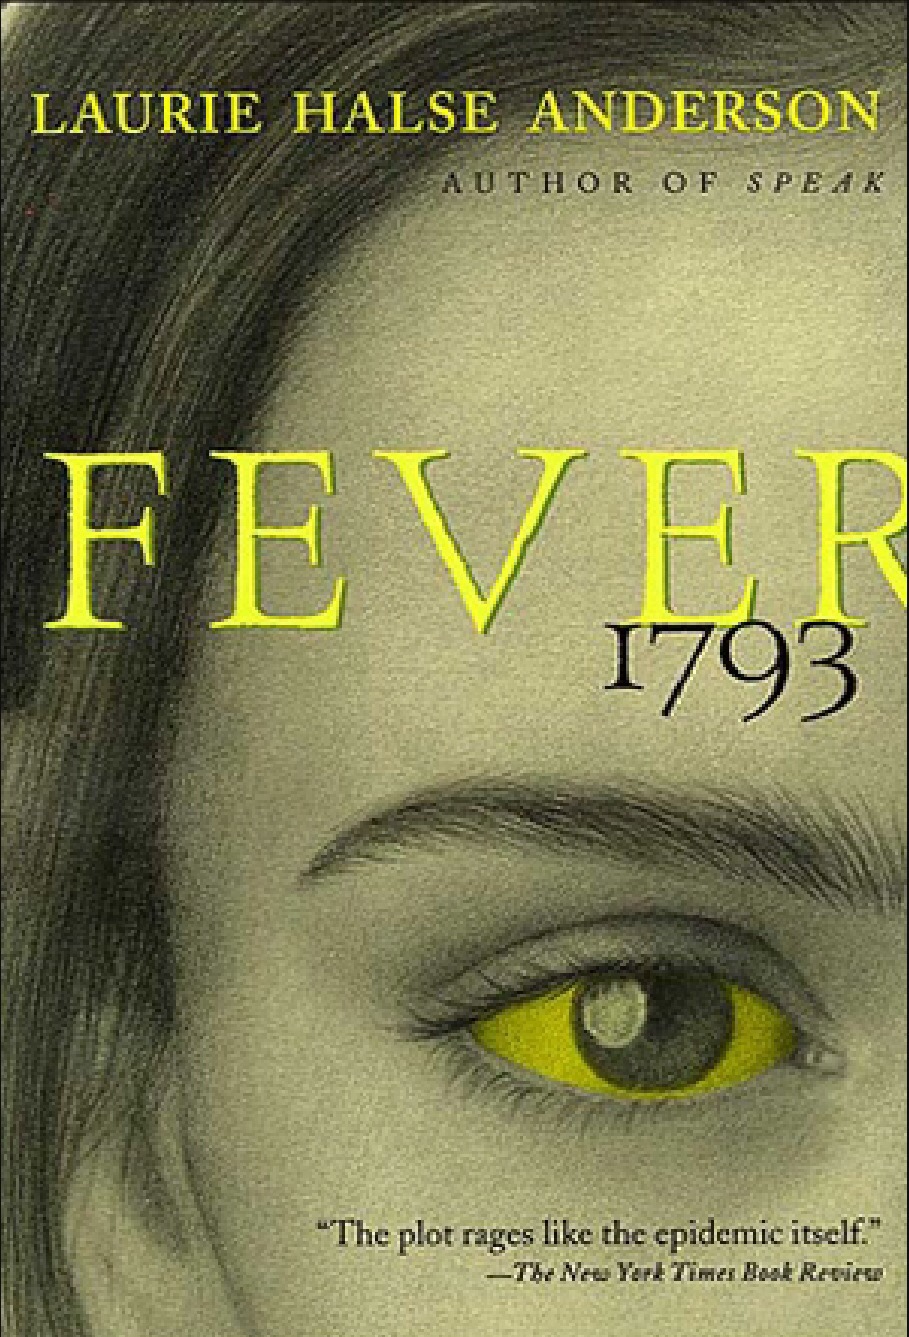 fever 1793 by laurie halse anderson